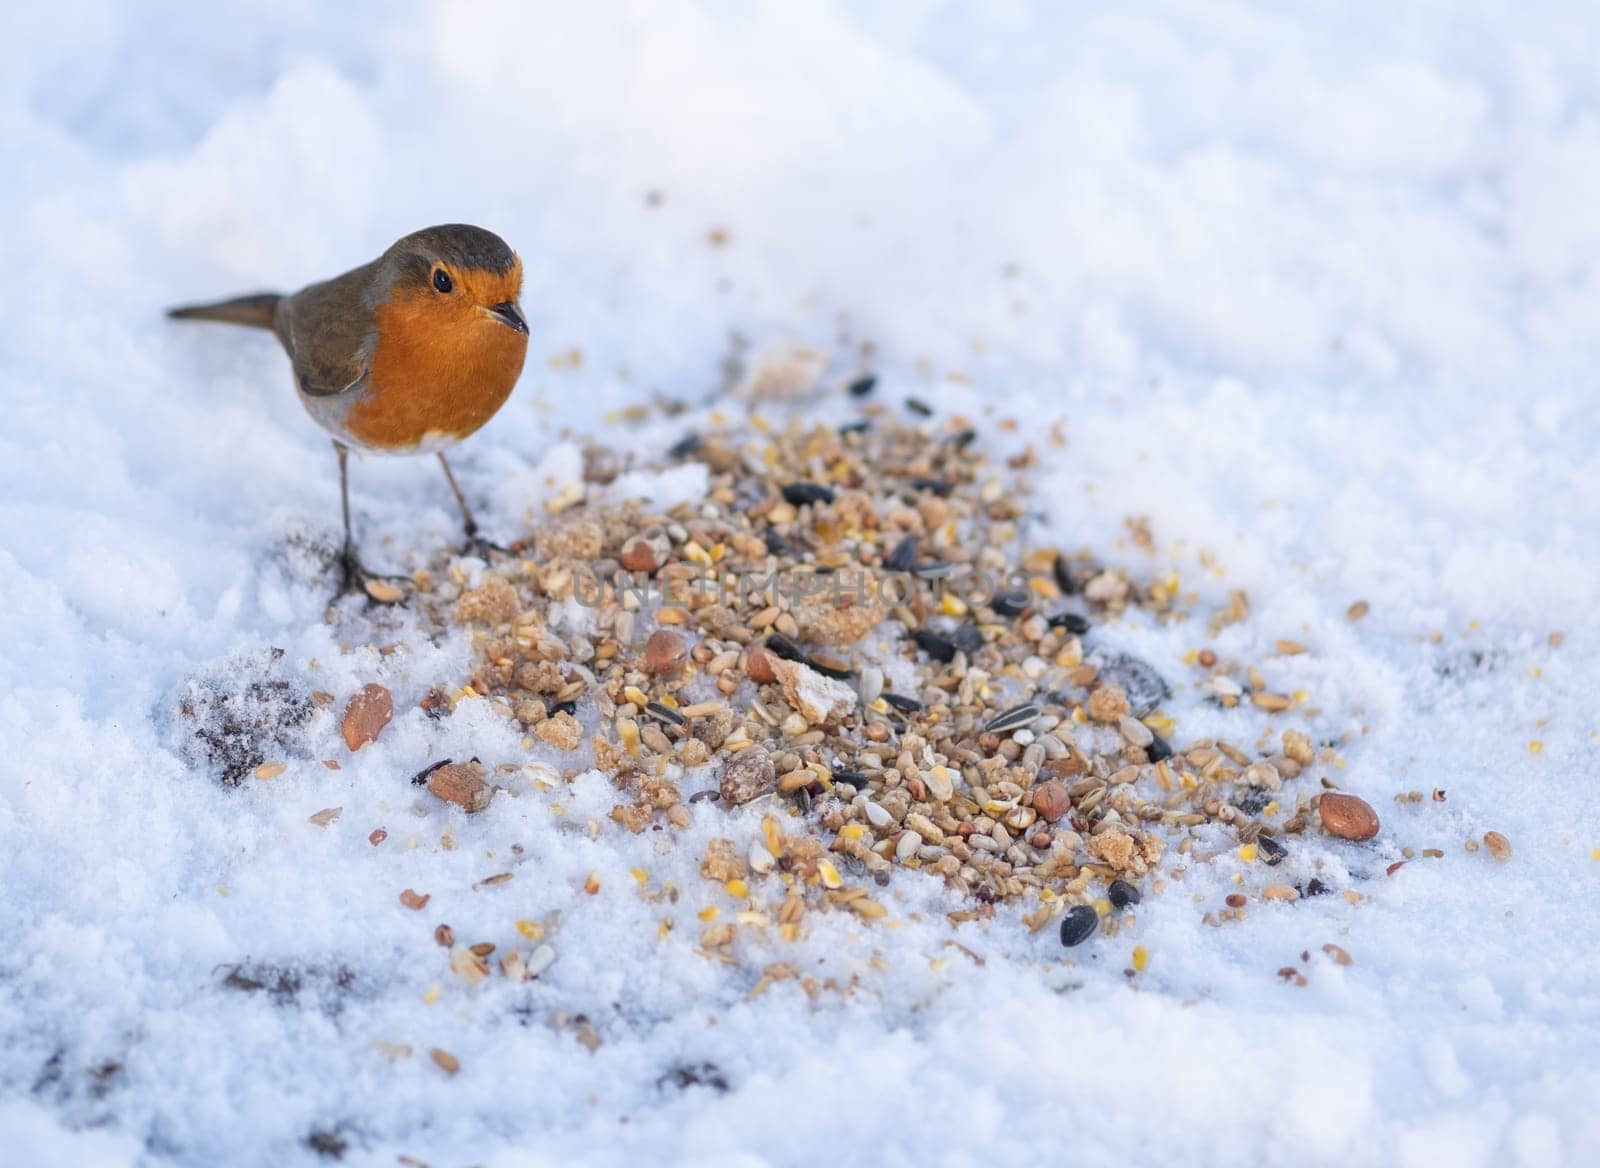 A Robin Bird Being Fed In The Snow